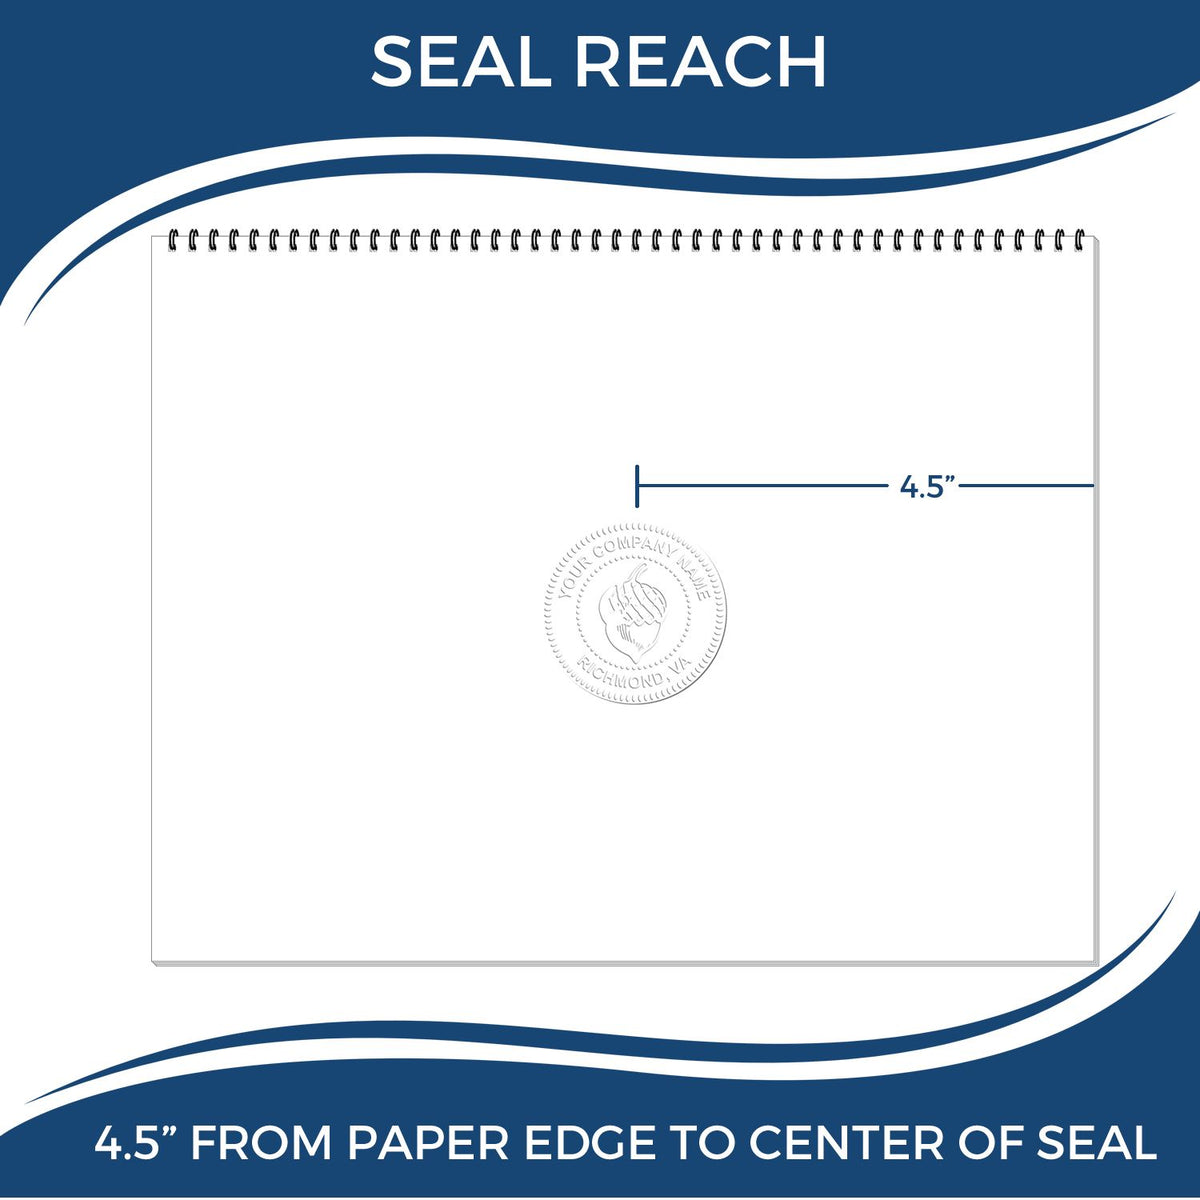 An infographic showing the seal reach which is represented by a ruler and a miniature seal image of the State of Nebraska Extended Long Reach Geologist Seal